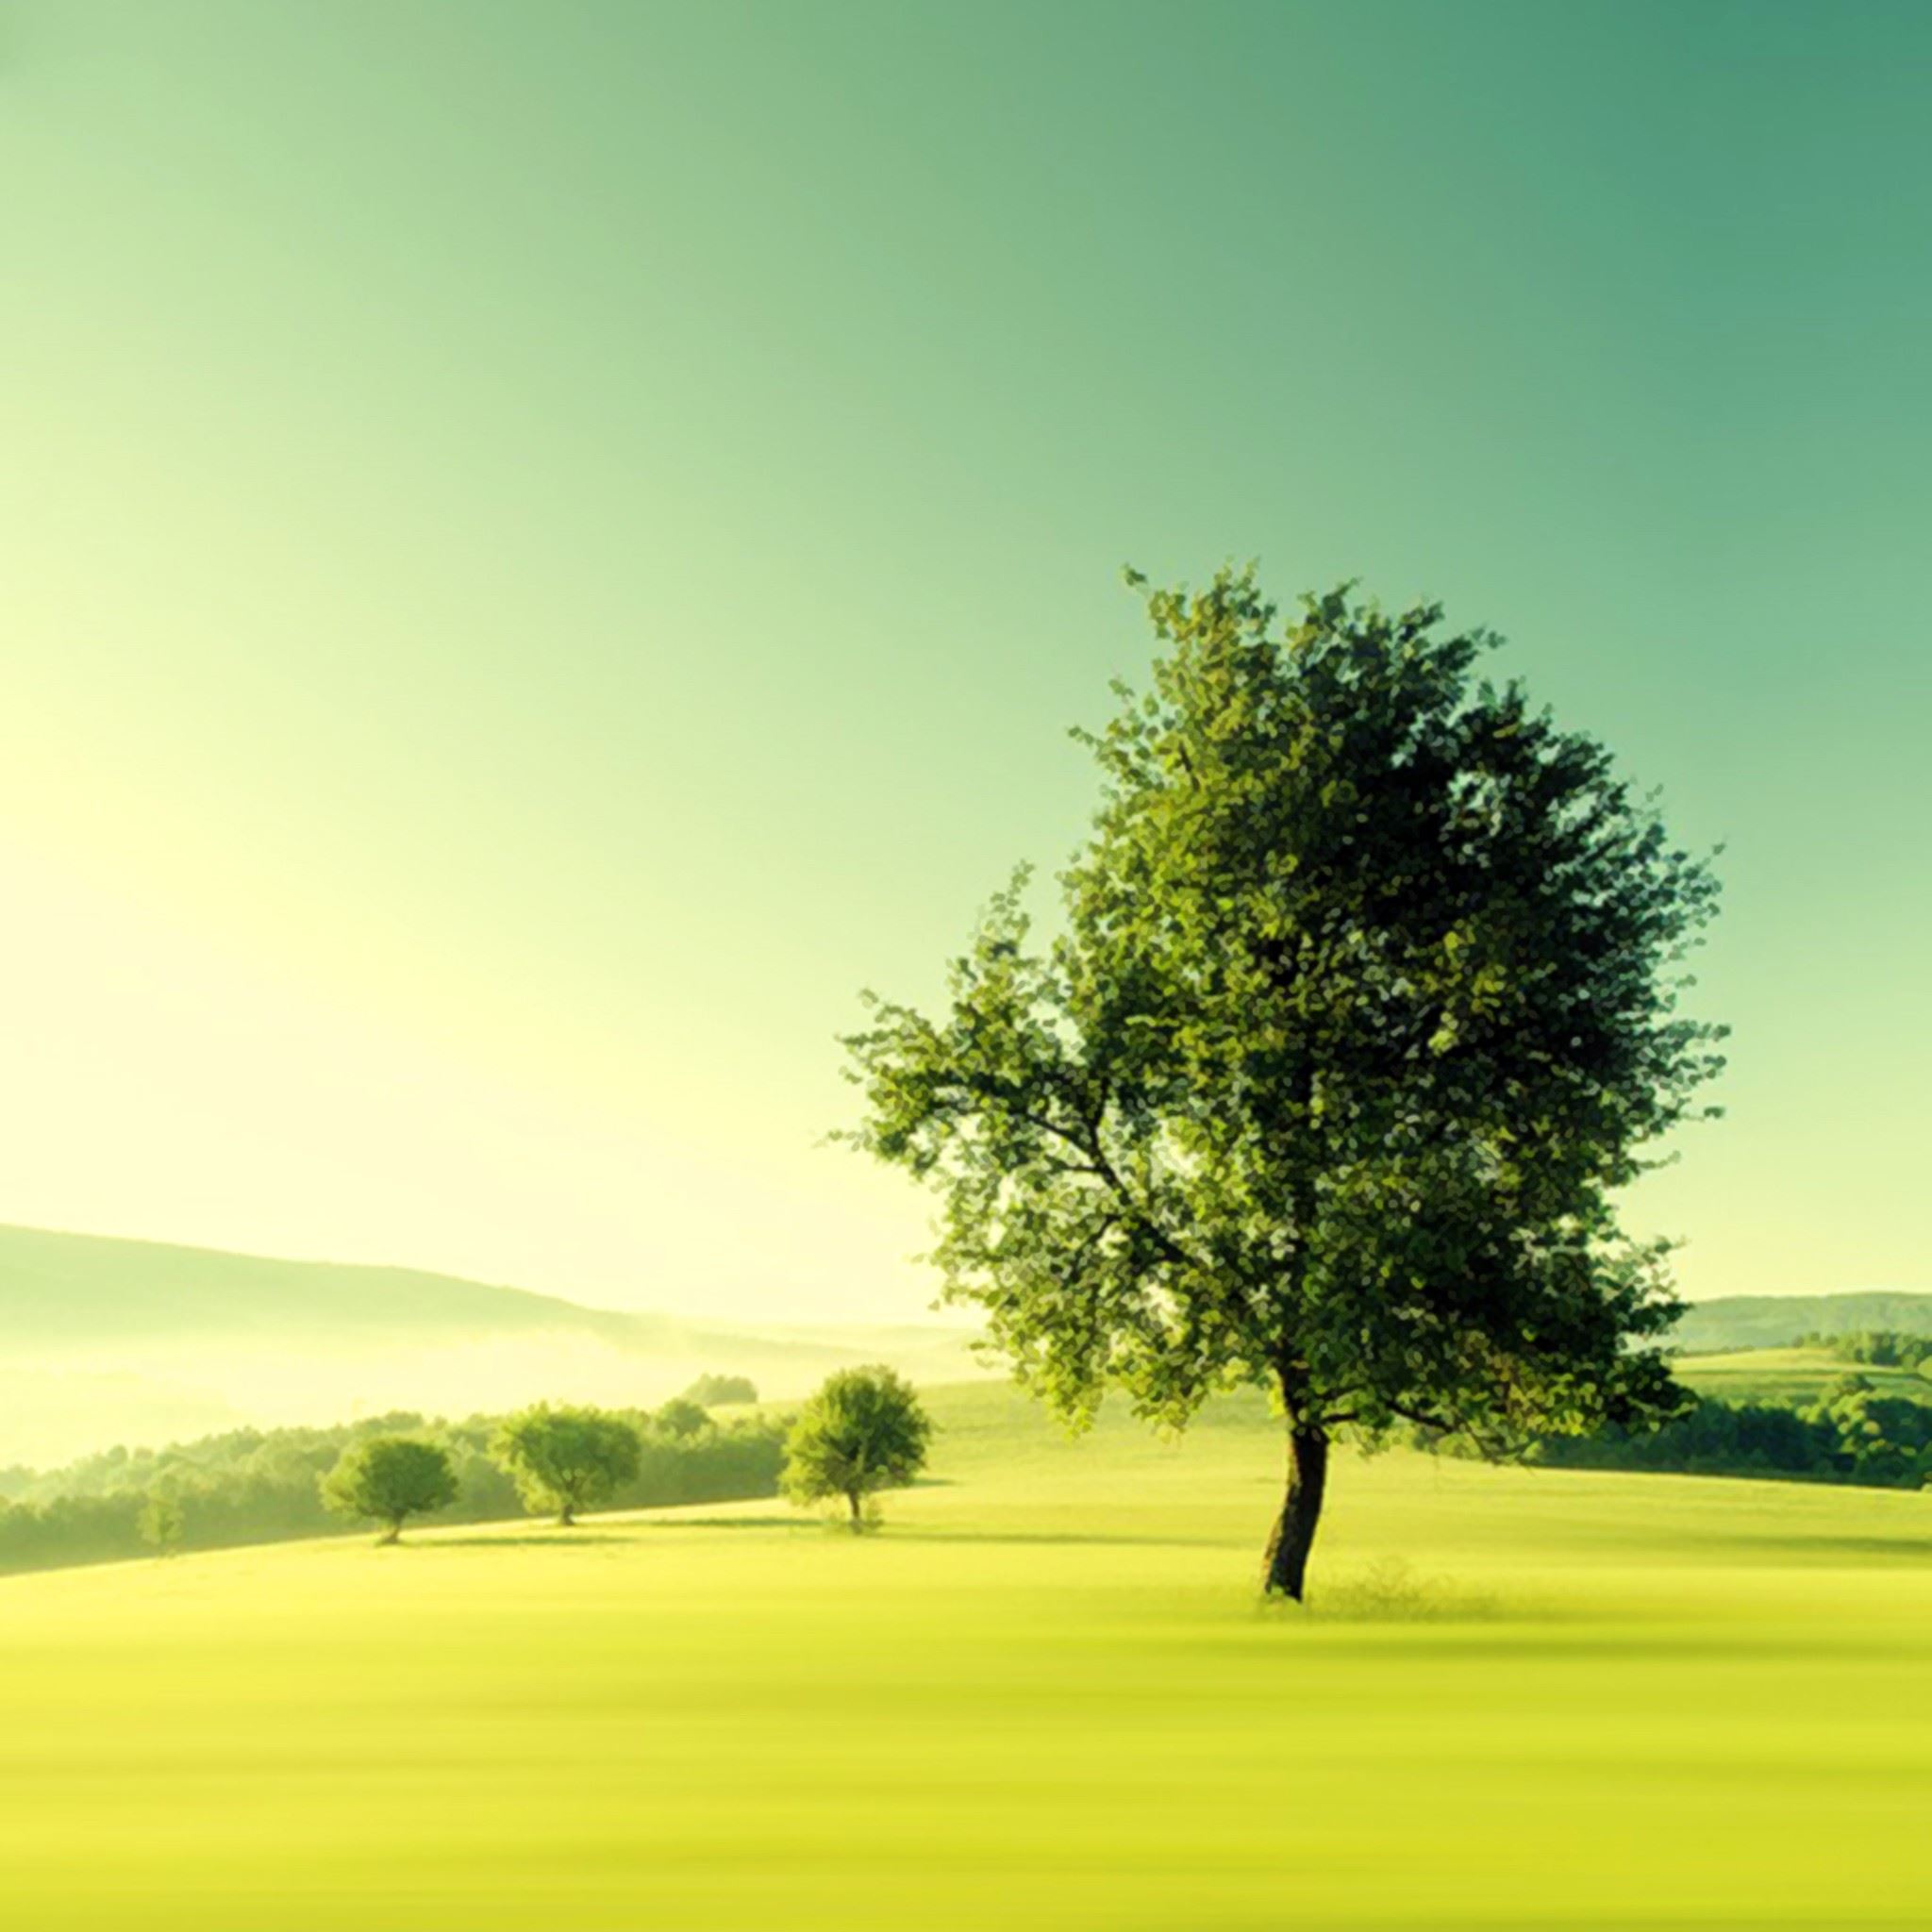 Nature Lonely Tree Plain Field iPad Air Wallpapers Free Download